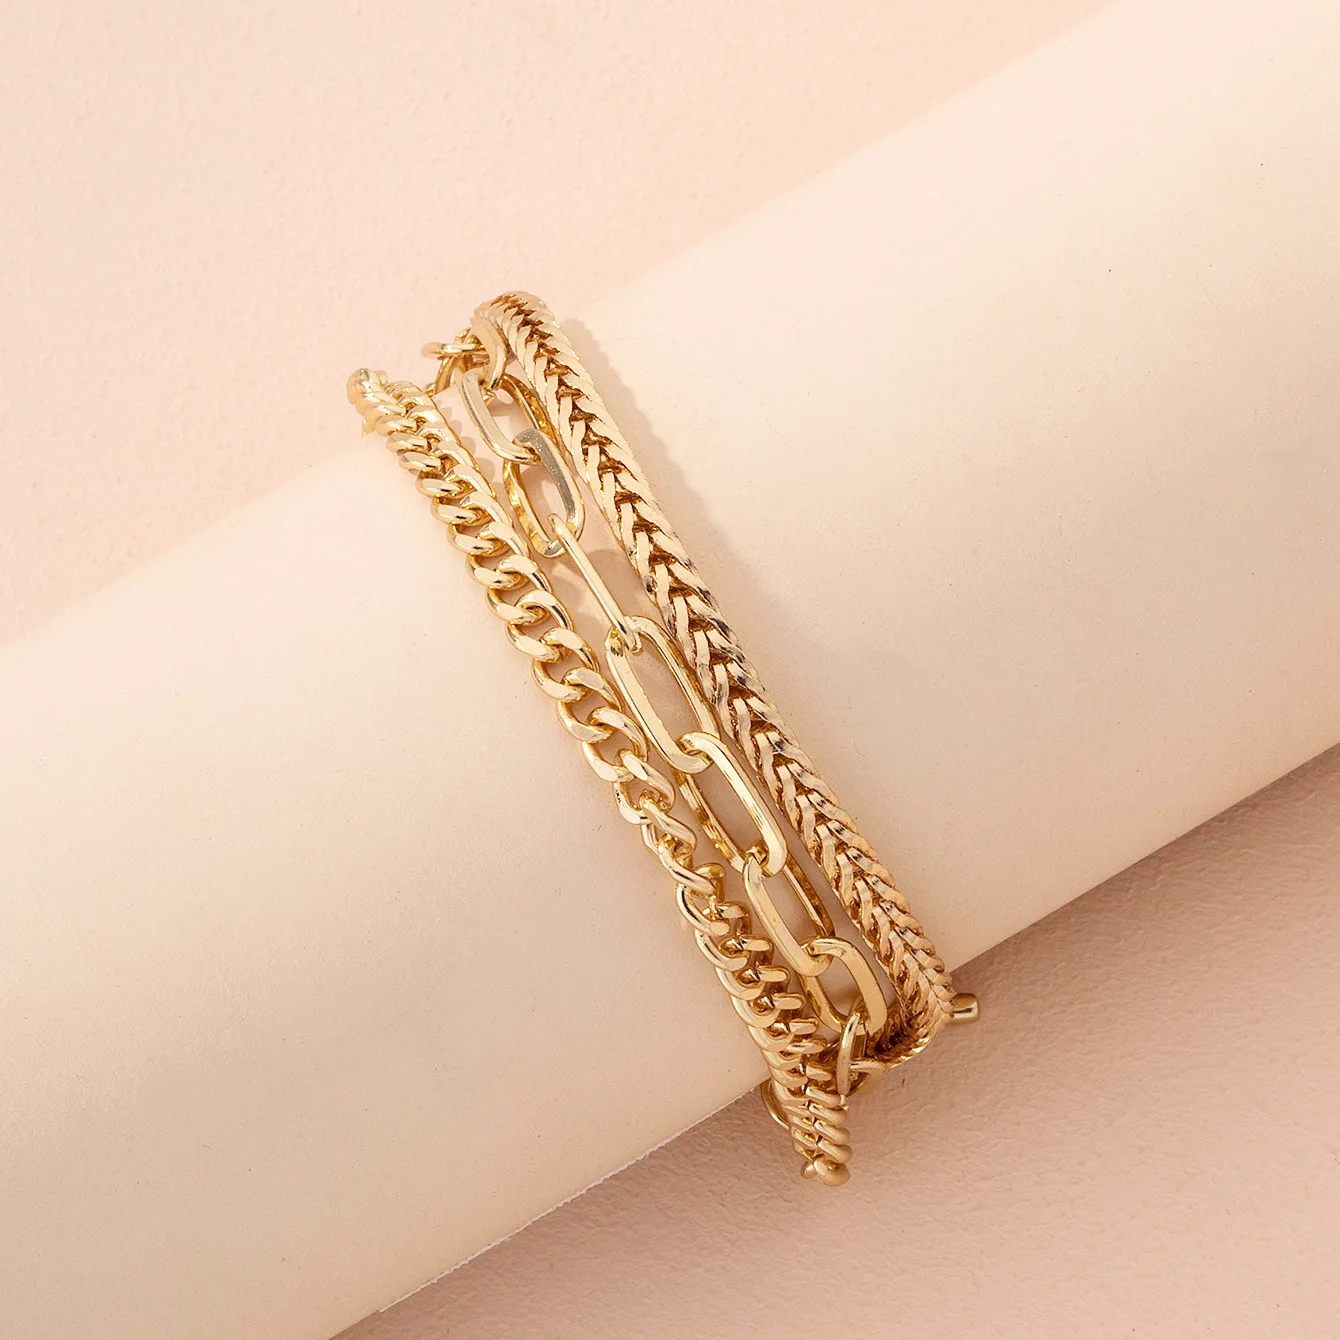 

OUYE Trend Exaggerated Thick Chain Three-layer Bracelet Female Hip-hop Street Style Simple Alloy Bracelet Jewelry, Picture shows